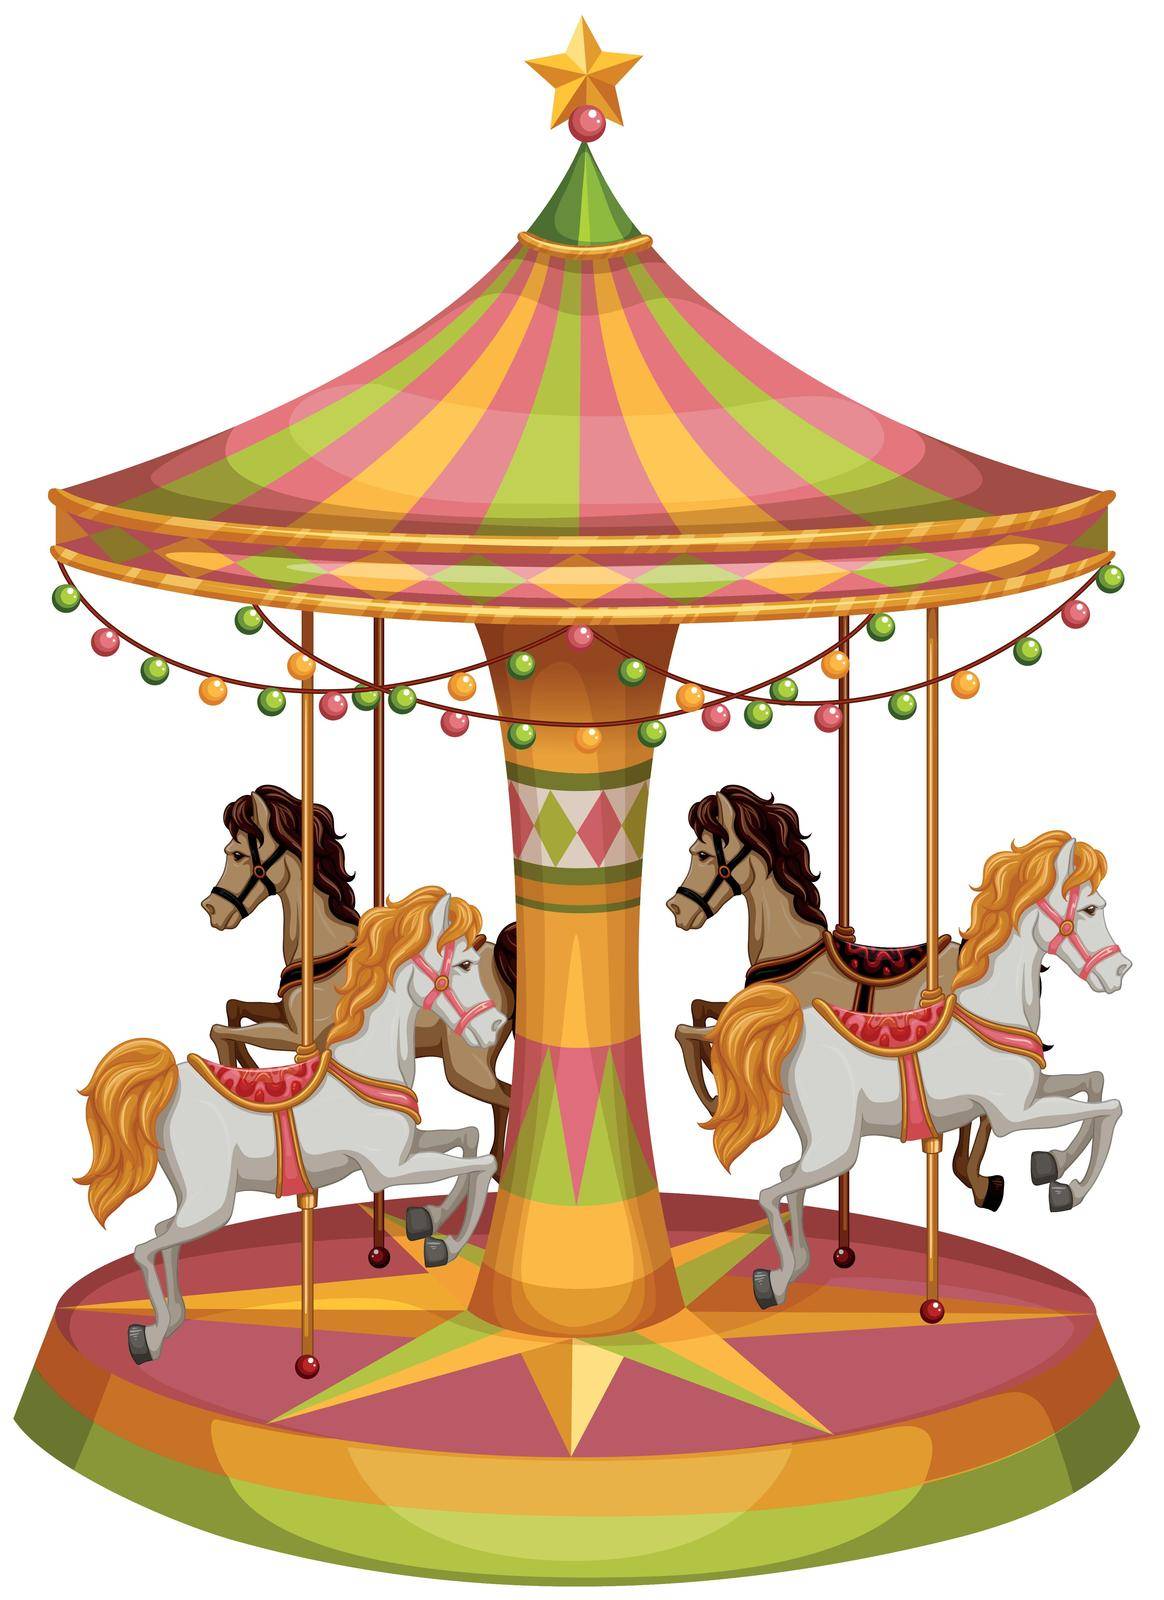 Illustration of a merry-go-round horse ride on a white background